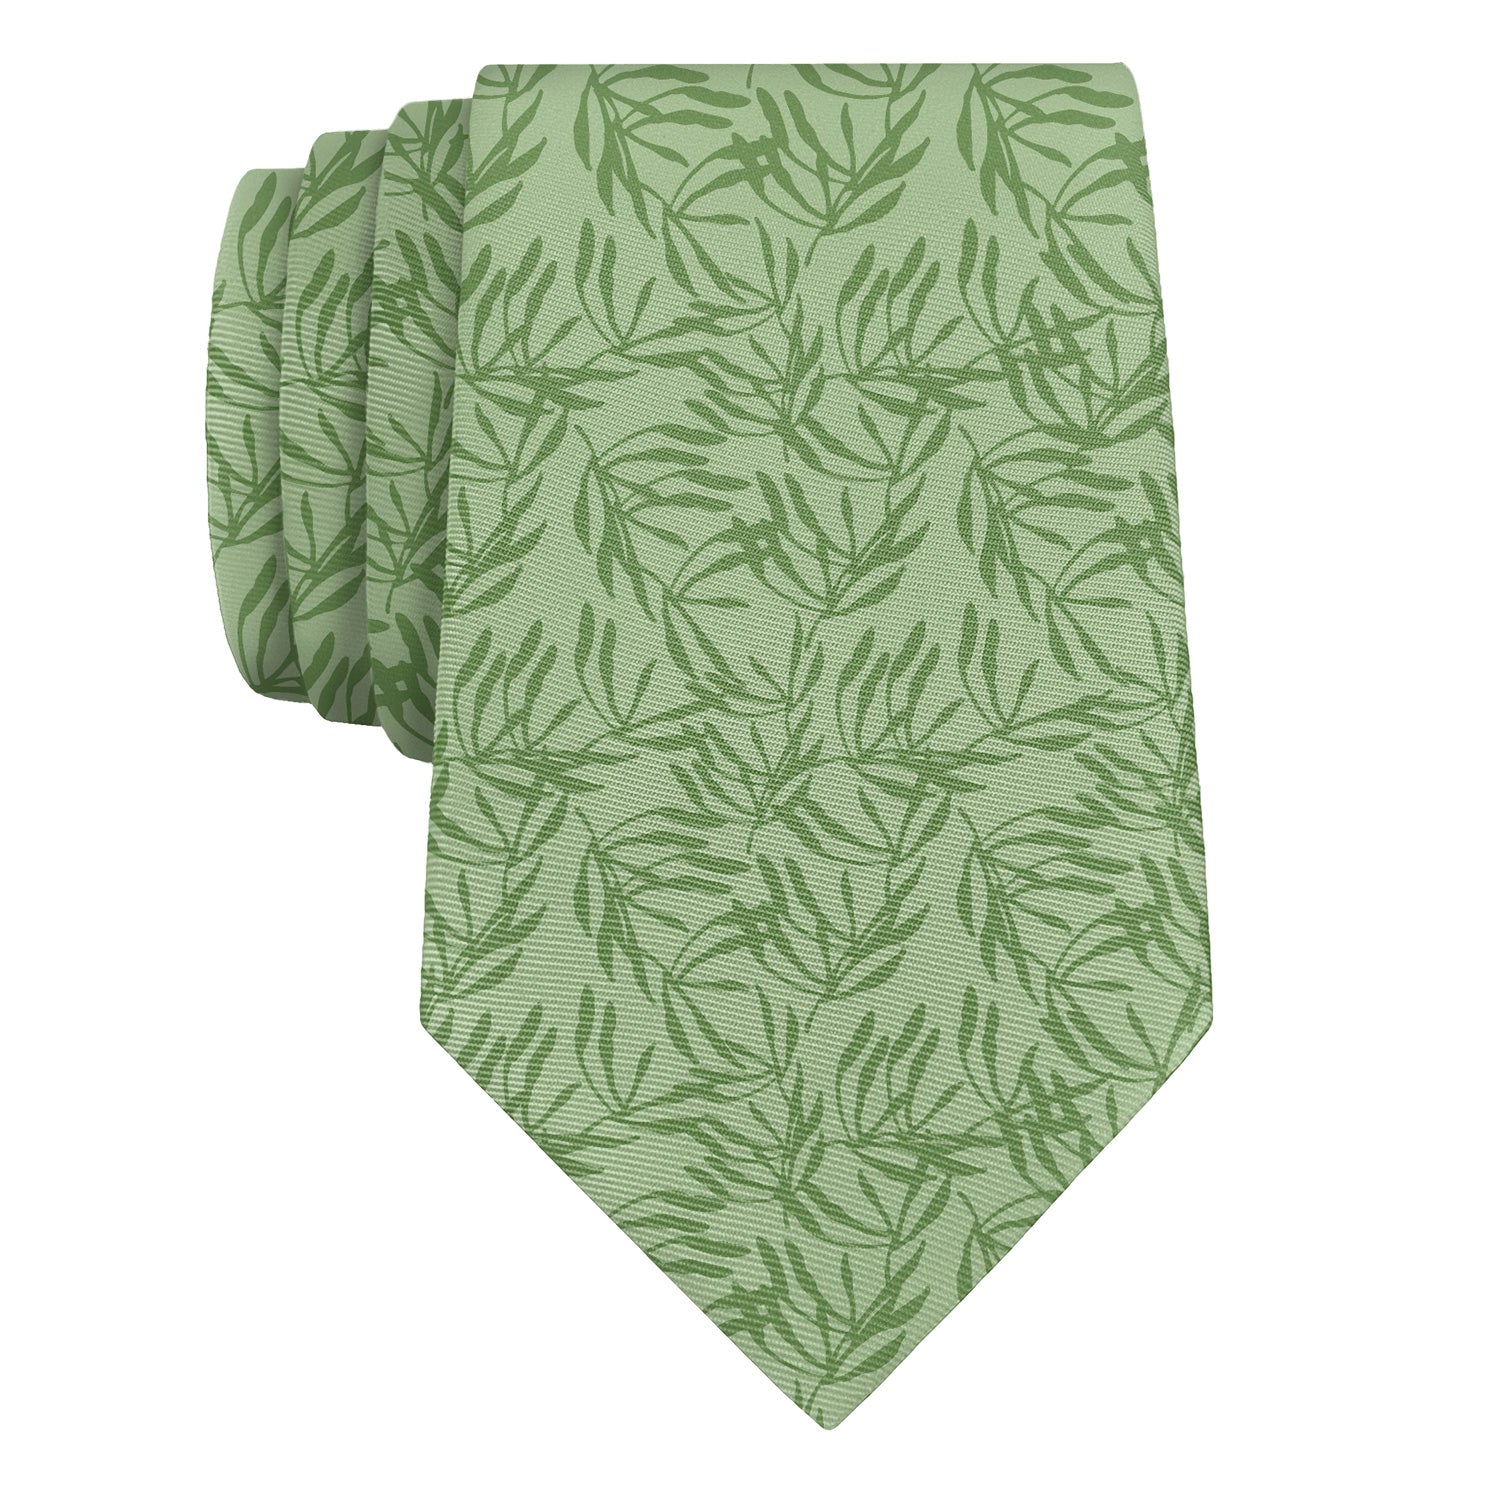 Olive Leaf Floral Necktie - Rolled - Knotty Tie Co.